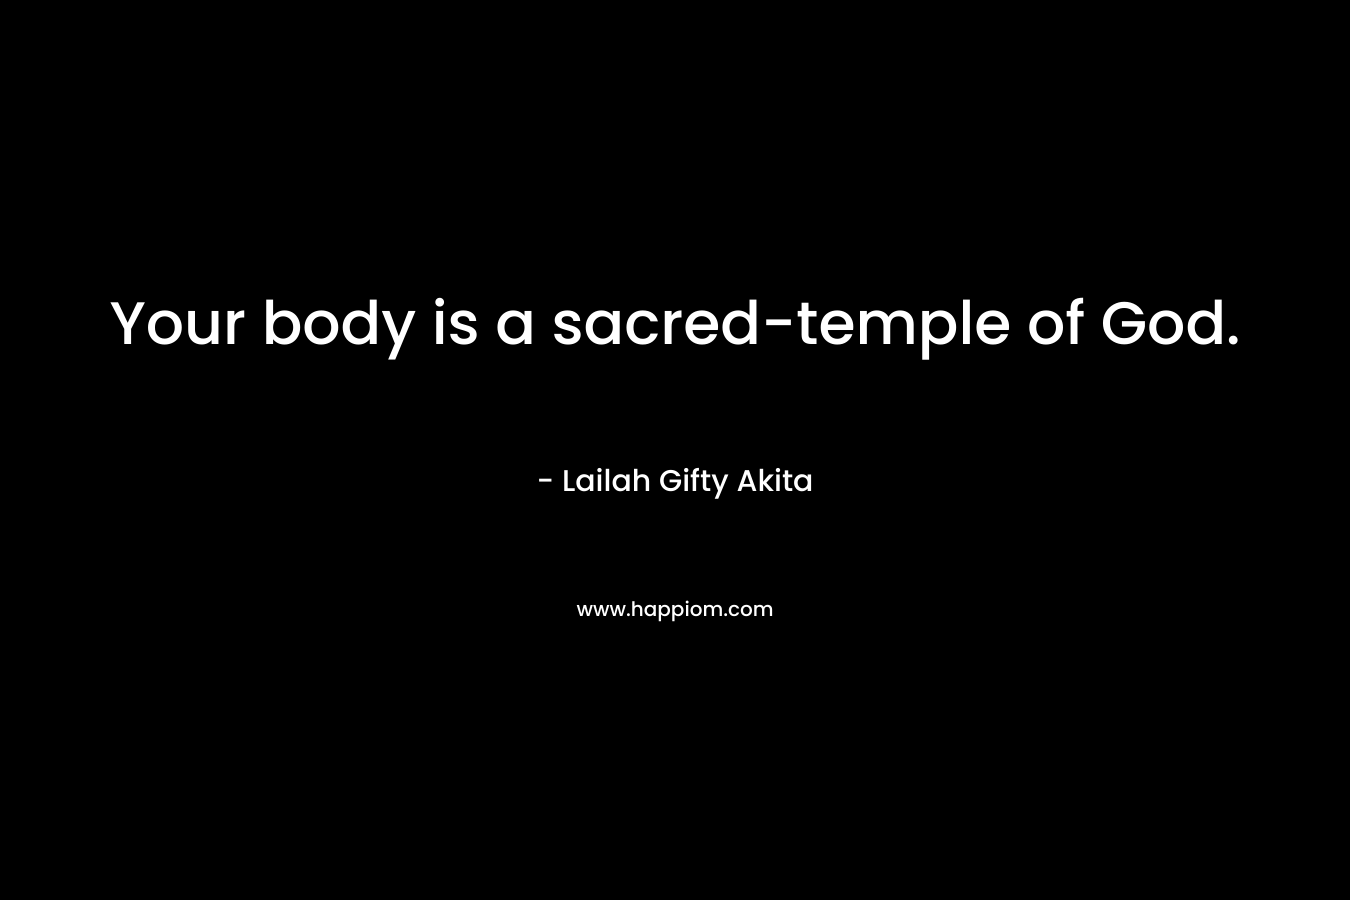 Your body is a sacred-temple of God.